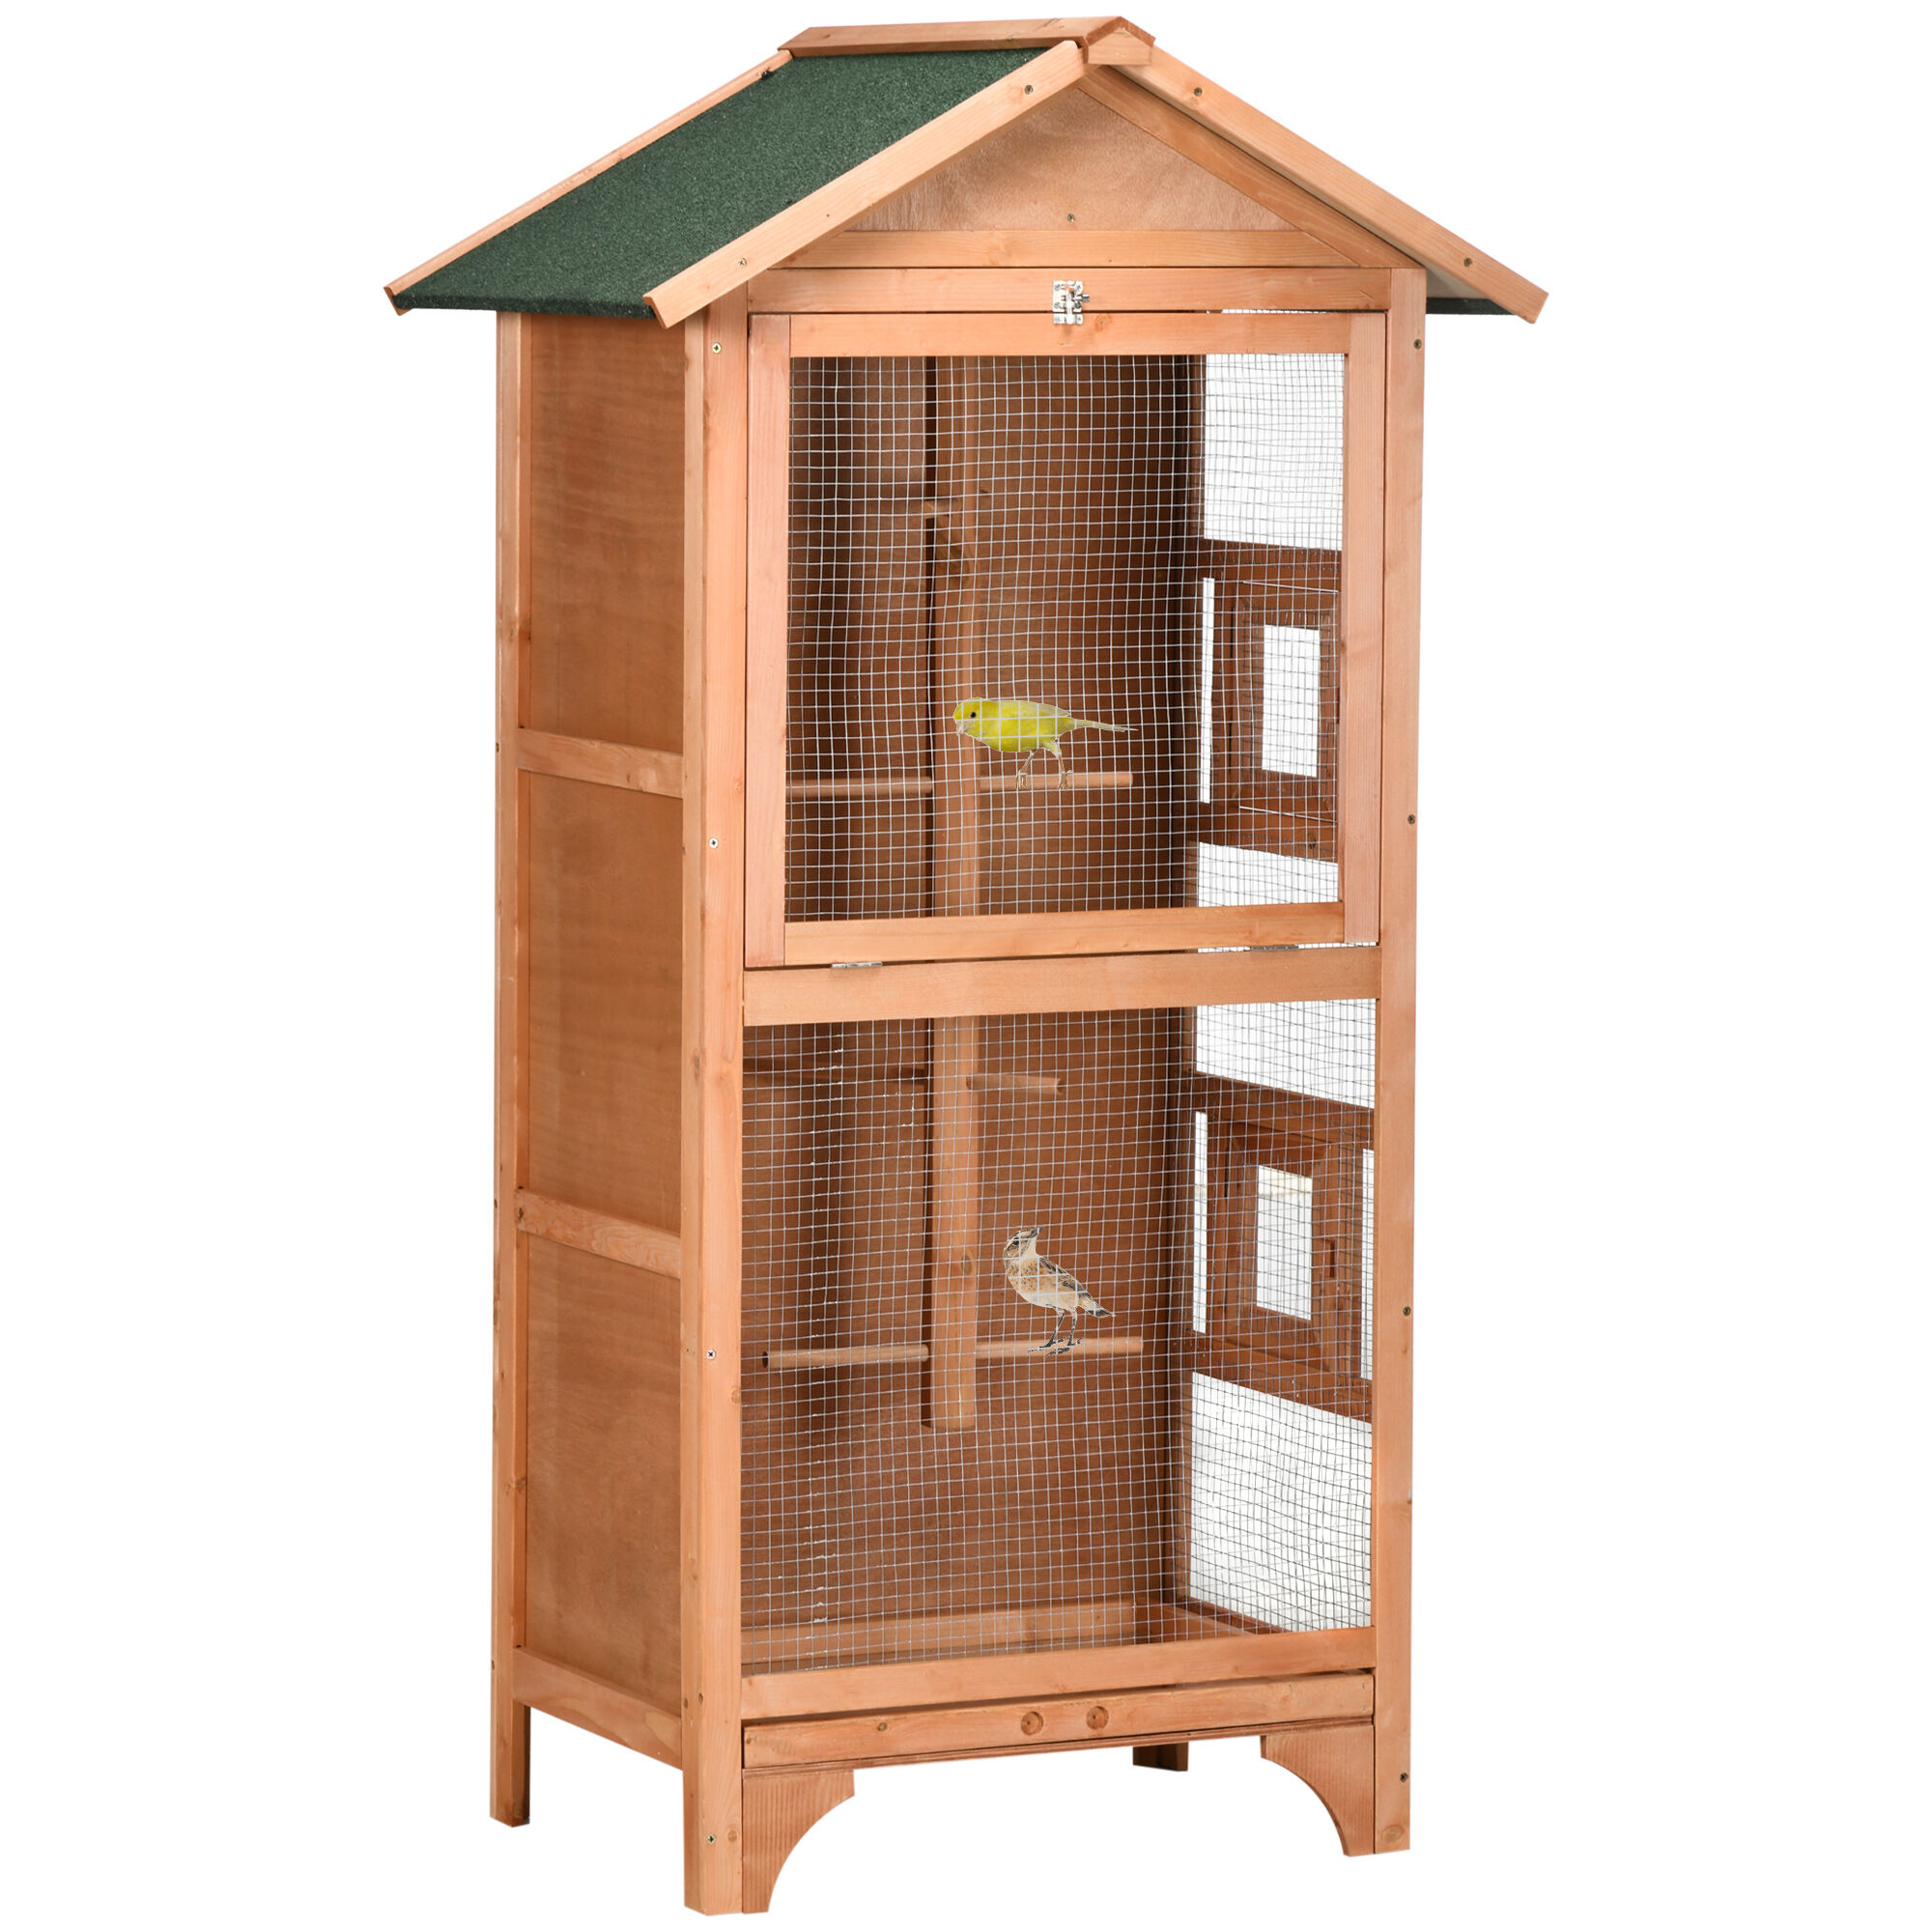 PawHut Wooden Outdoor Bird Cage Orange Large Play House with 4 Perch Removable Tray for Easy Cleaning   Aosom.com